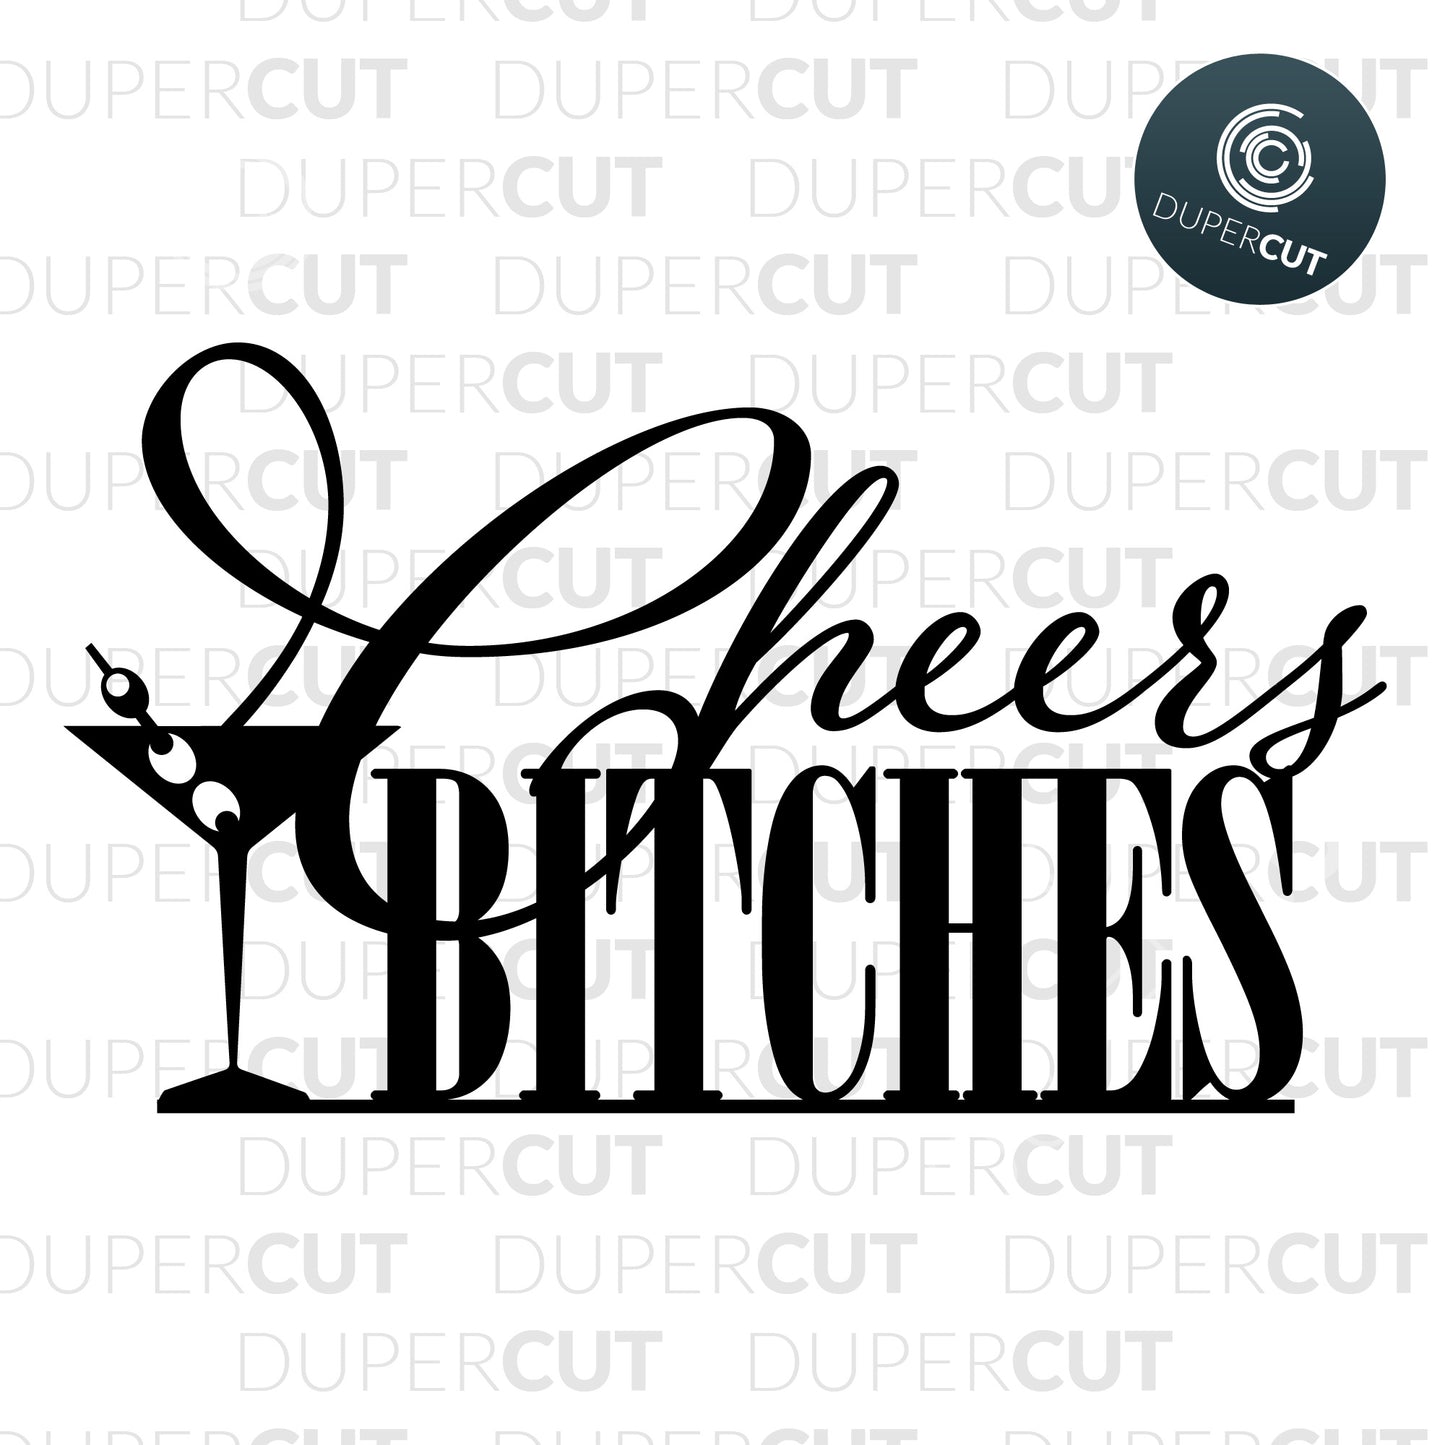 Papercutting Template - Cheers Bitches Cake topper - Bridal shower - Bachelorette Party